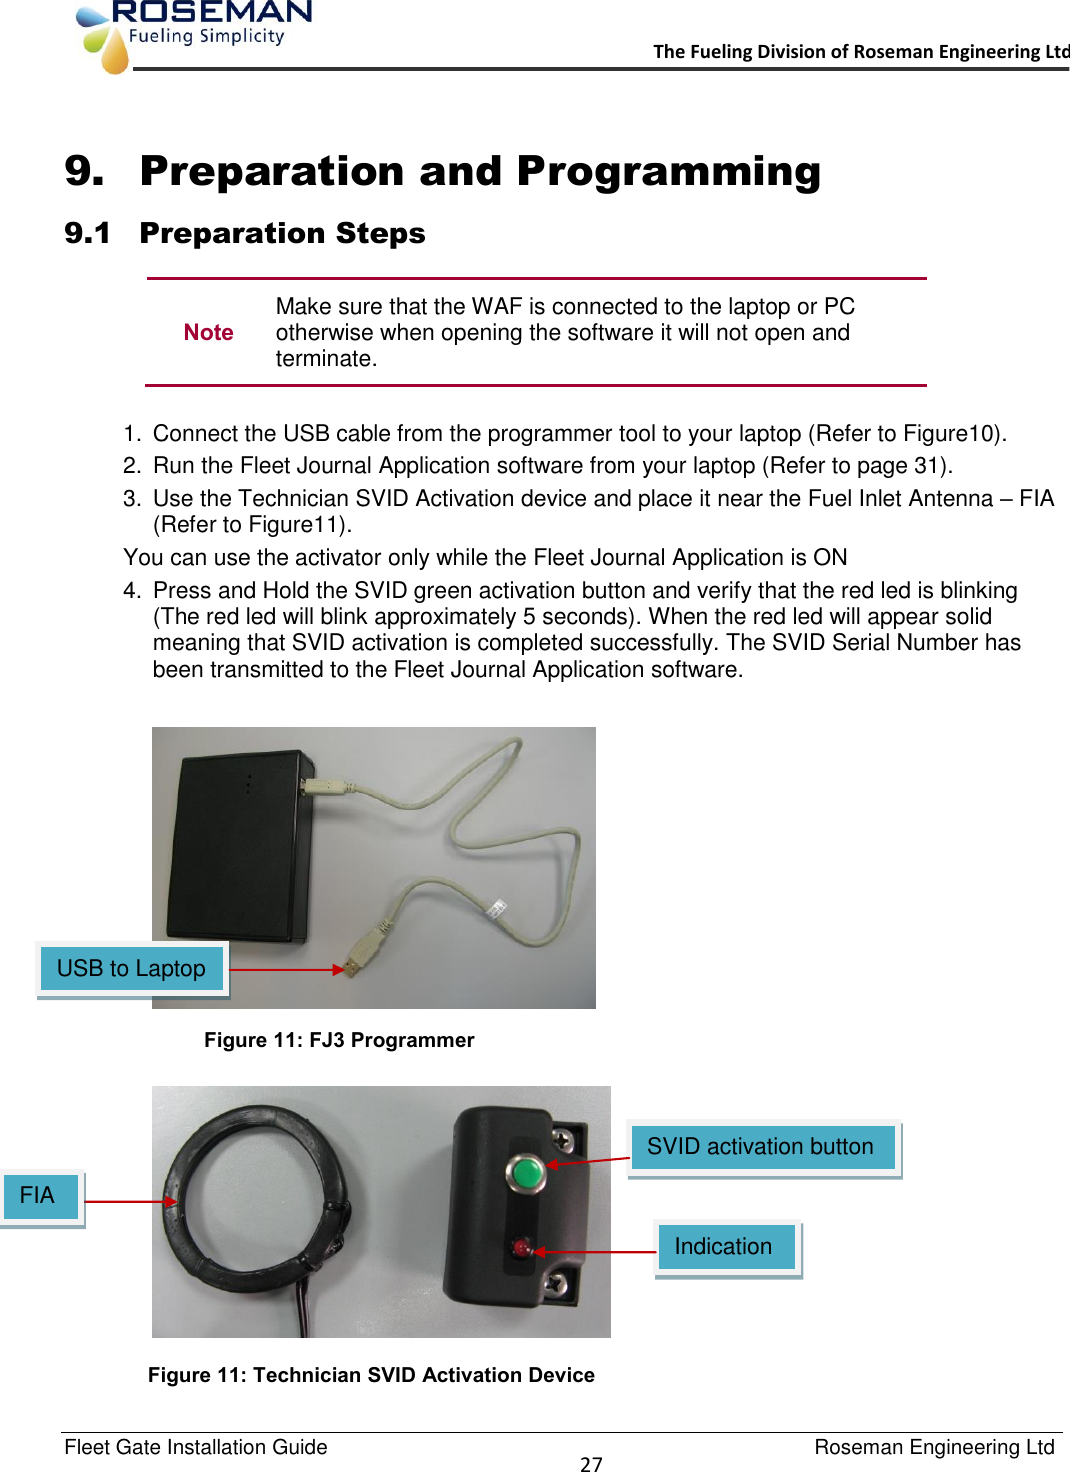   Fleet Gate Installation Guide                                                                                    Roseman Engineering Ltd  27      The Fueling Division of Roseman Engineering Ltd.                                                                  9. Preparation and Programming 9.1 Preparation Steps  Note Make sure that the WAF is connected to the laptop or PC otherwise when opening the software it will not open and terminate.  1.  Connect the USB cable from the programmer tool to your laptop (Refer to Figure10). 2.  Run the Fleet Journal Application software from your laptop (Refer to page 31). 3.  Use the Technician SVID Activation device and place it near the Fuel Inlet Antenna – FIA (Refer to Figure11). You can use the activator only while the Fleet Journal Application is ON  4.  Press and Hold the SVID green activation button and verify that the red led is blinking (The red led will blink approximately 5 seconds). When the red led will appear solid meaning that SVID activation is completed successfully. The SVID Serial Number has been transmitted to the Fleet Journal Application software.       SVID activation button Figure 11: Technician SVID Activation Device  Figure 11: FJ3 Programmer Indication LED USB to Laptop  FIA 